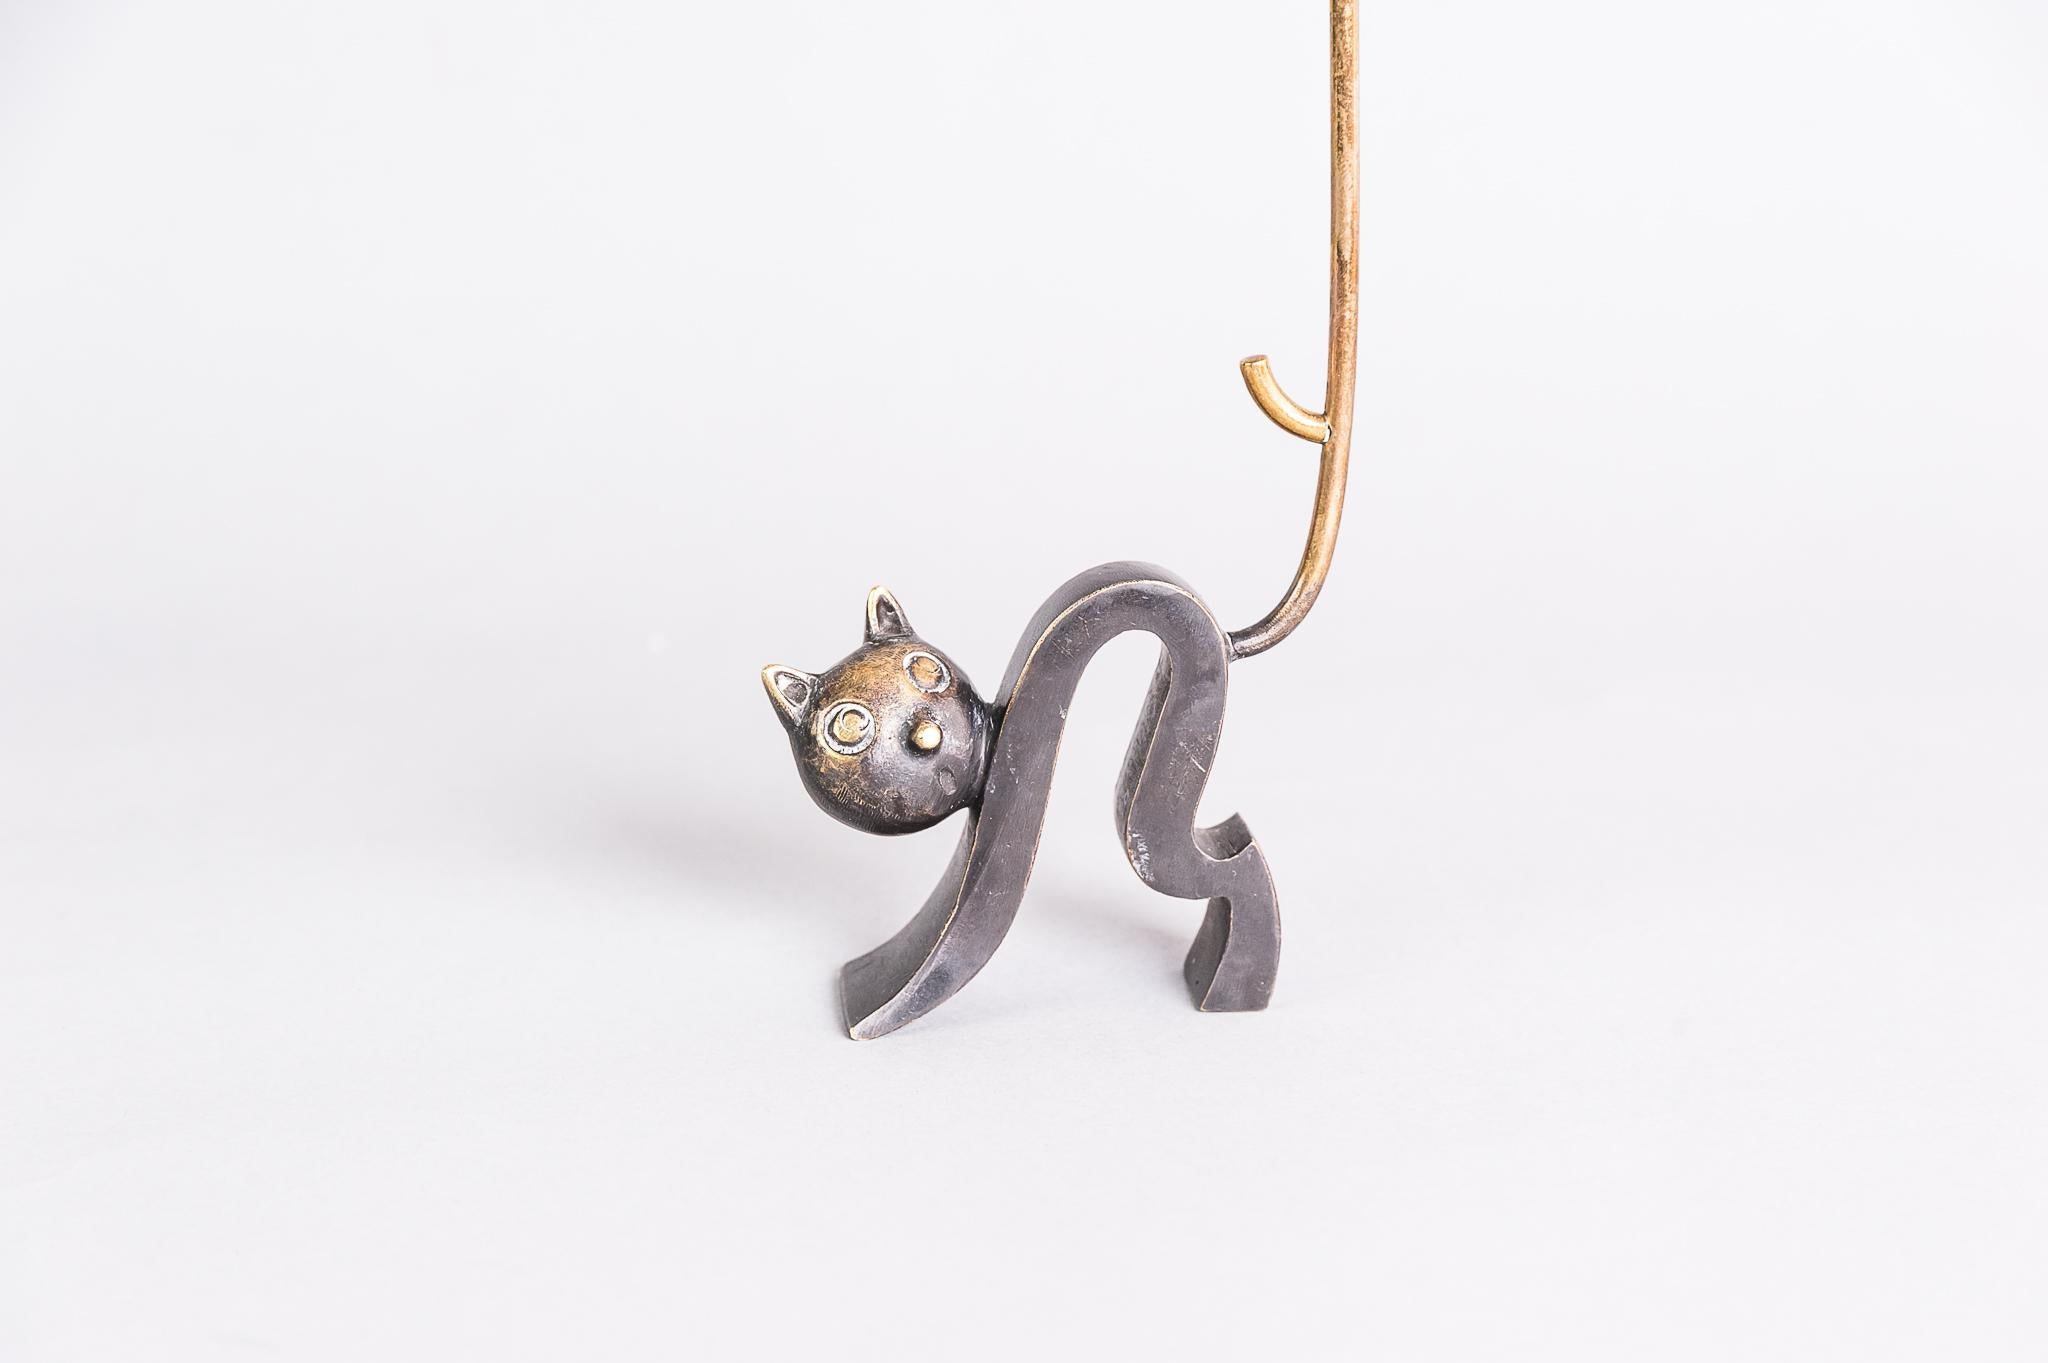 Ring holder cat by Richard Rohac, 1950s
Original condition.